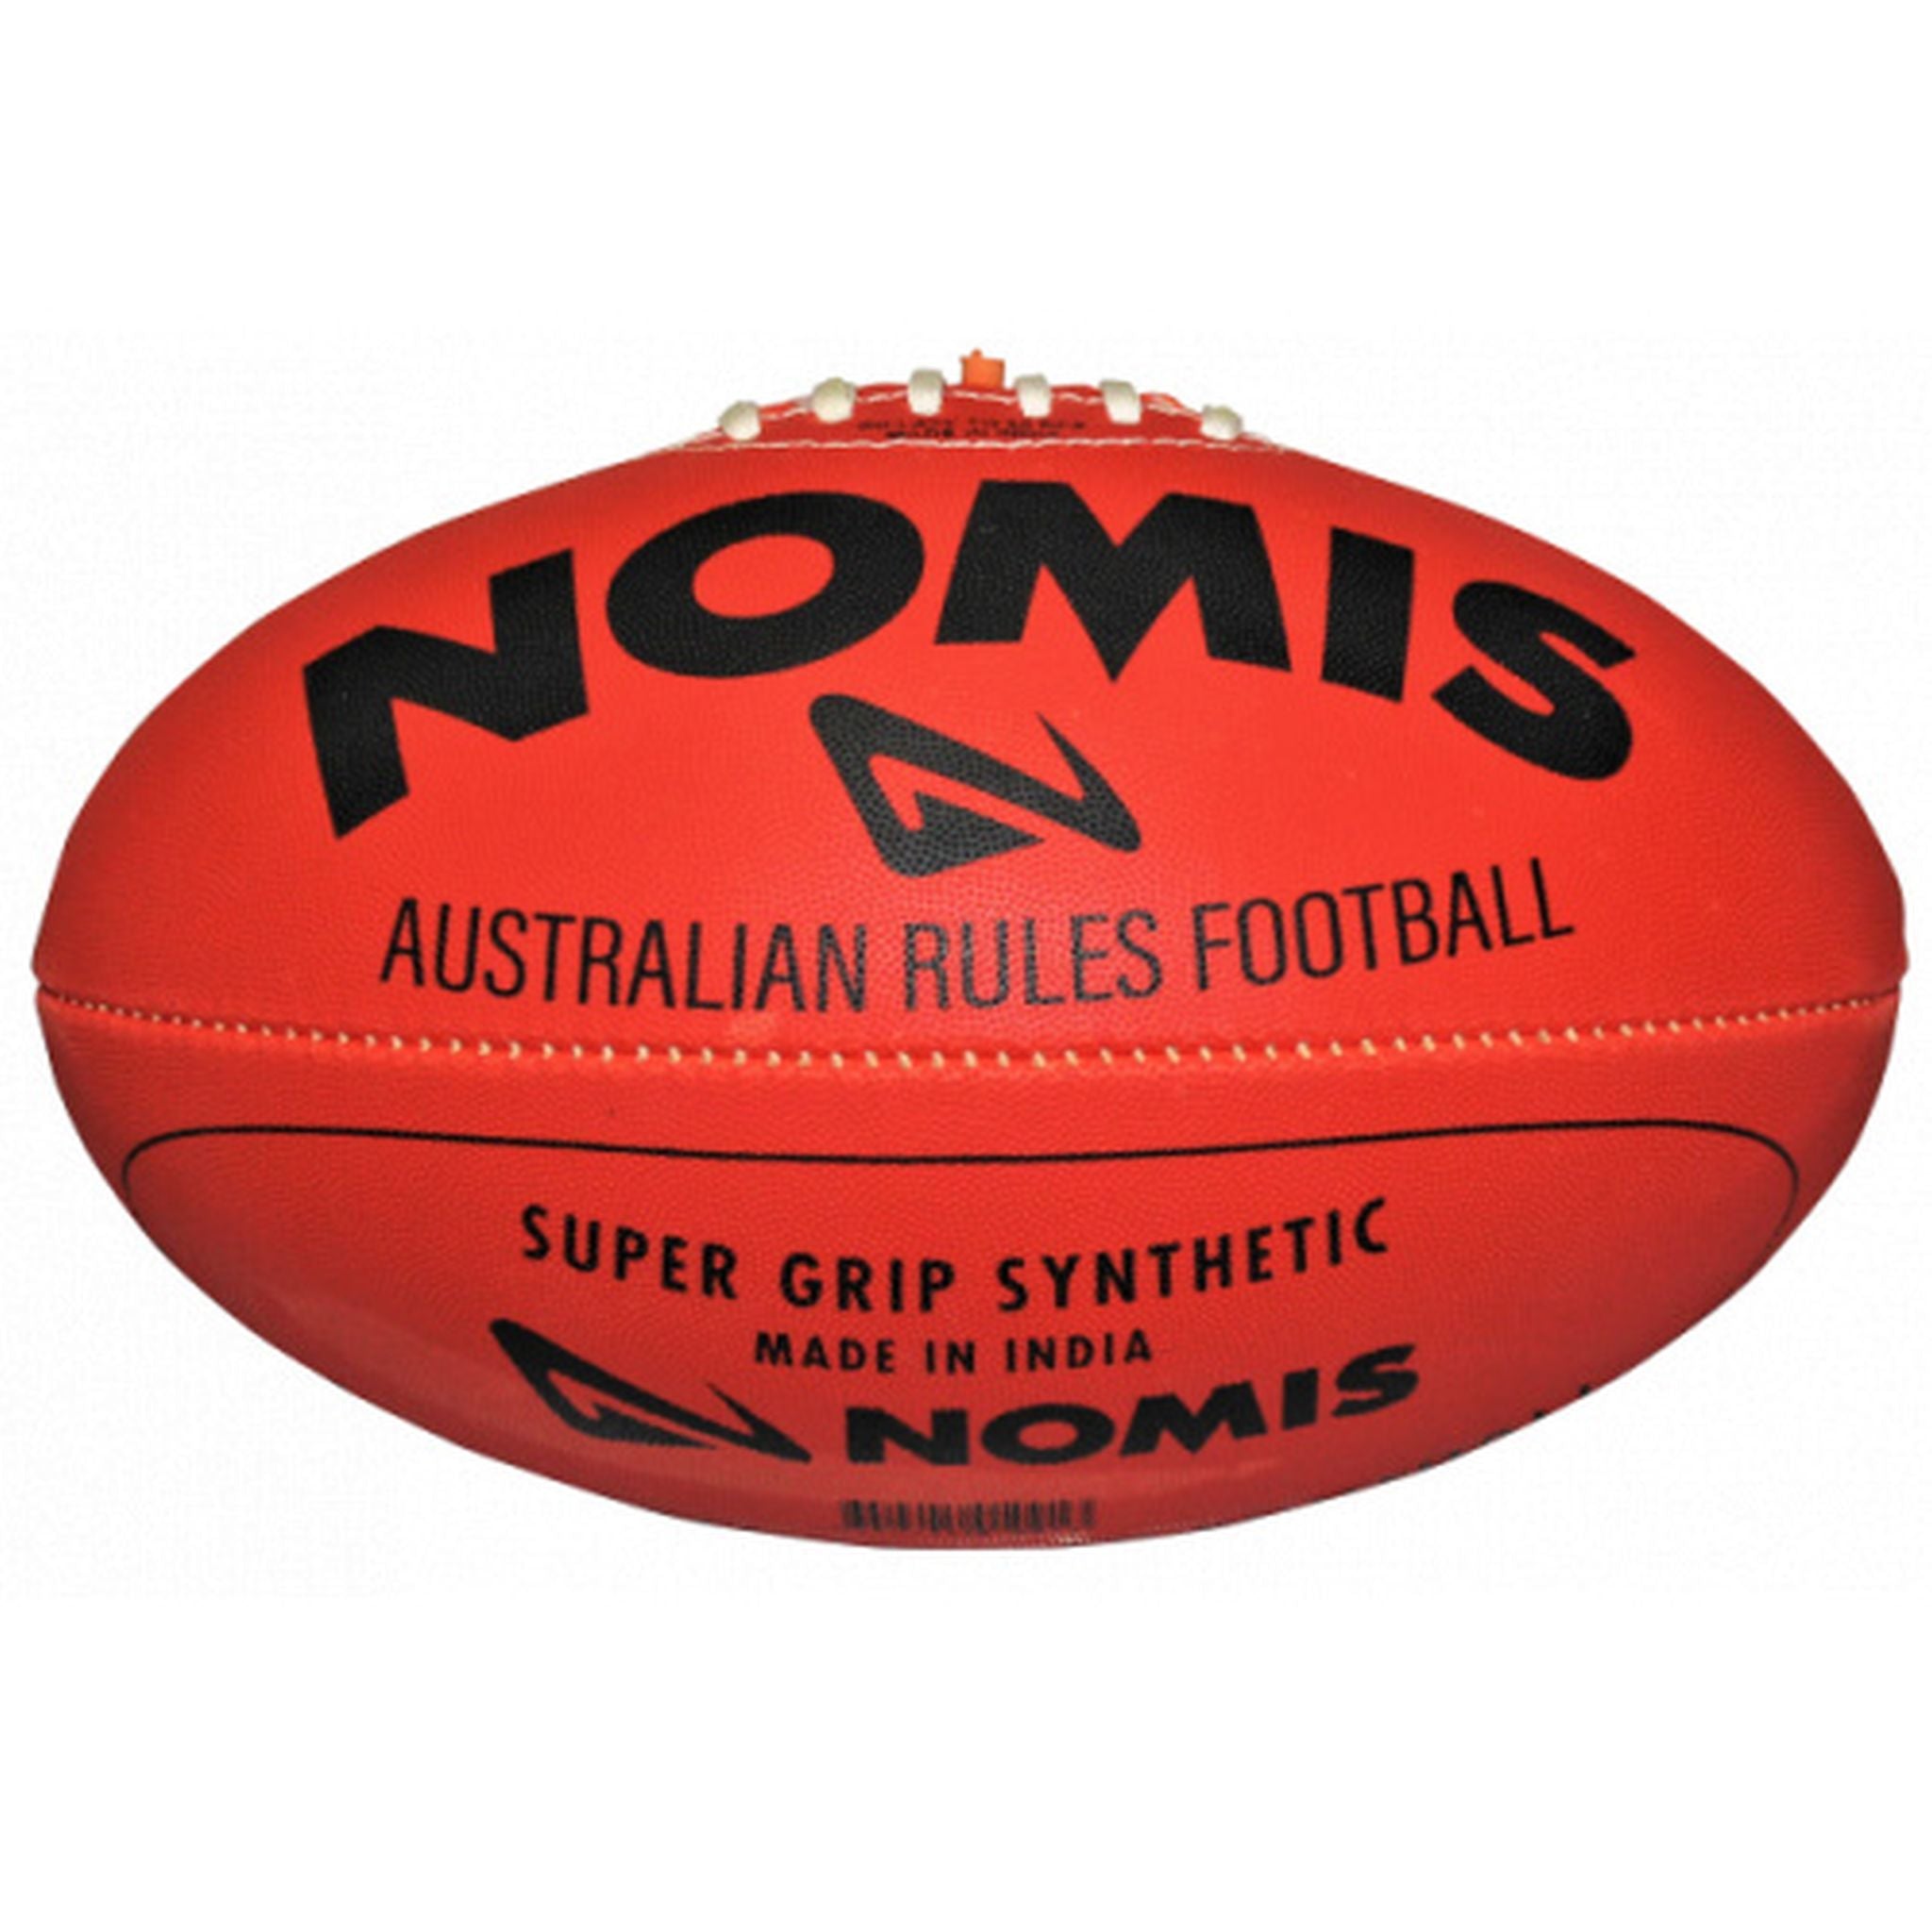 Nomis Synthetic Football